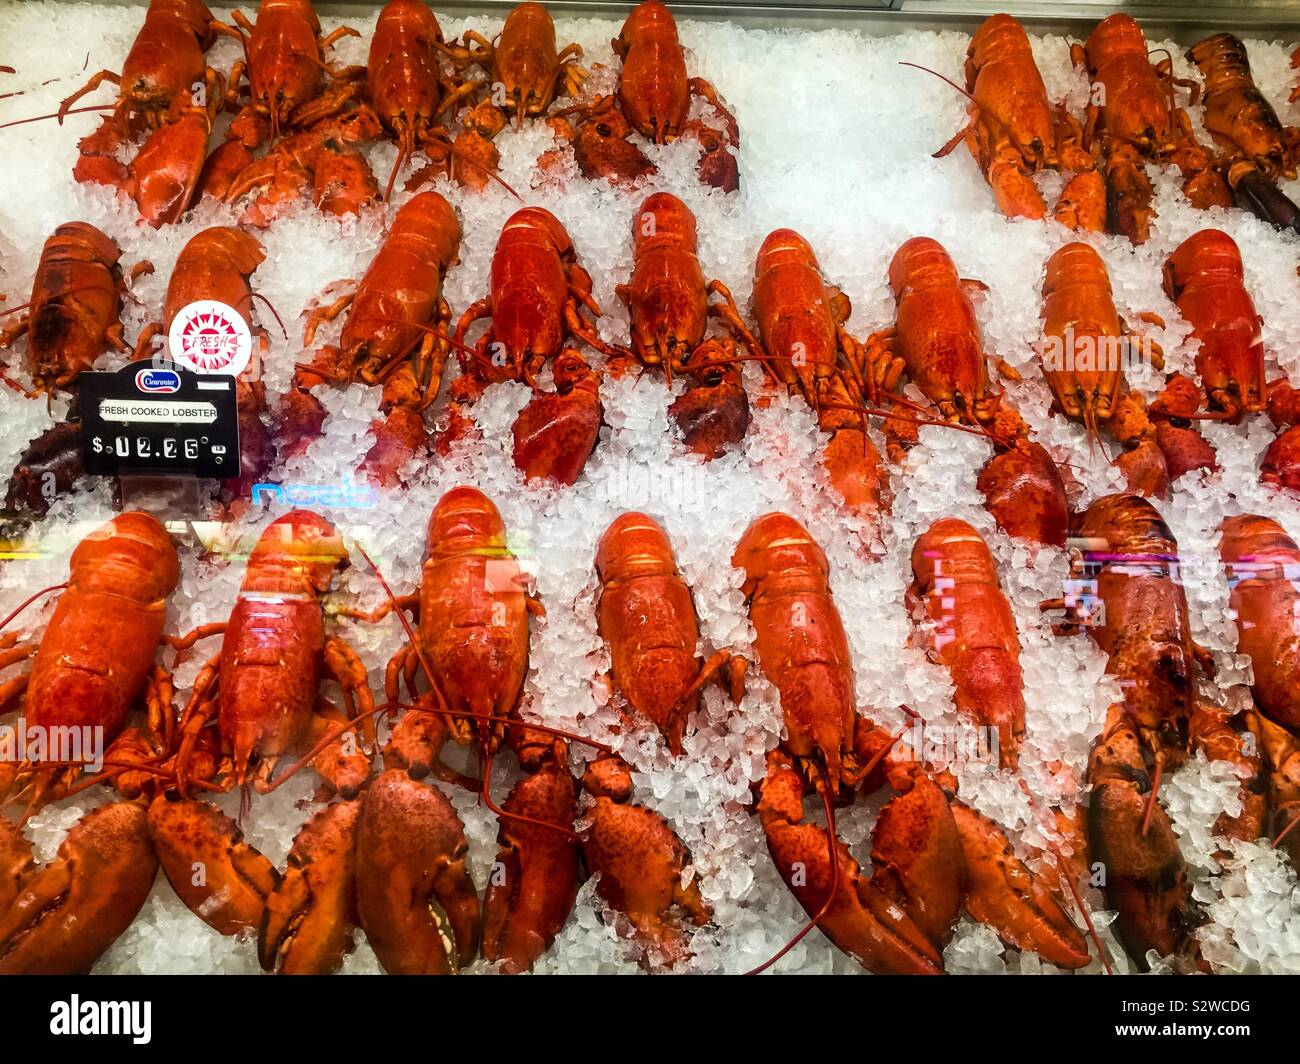 Freshly cooked lobster on ice in a display case. Ready to eat or ship worldwide. Good eats. Local. From the Atlantic Ocean. Also in Maine, USA. No packaging. Stock Photo